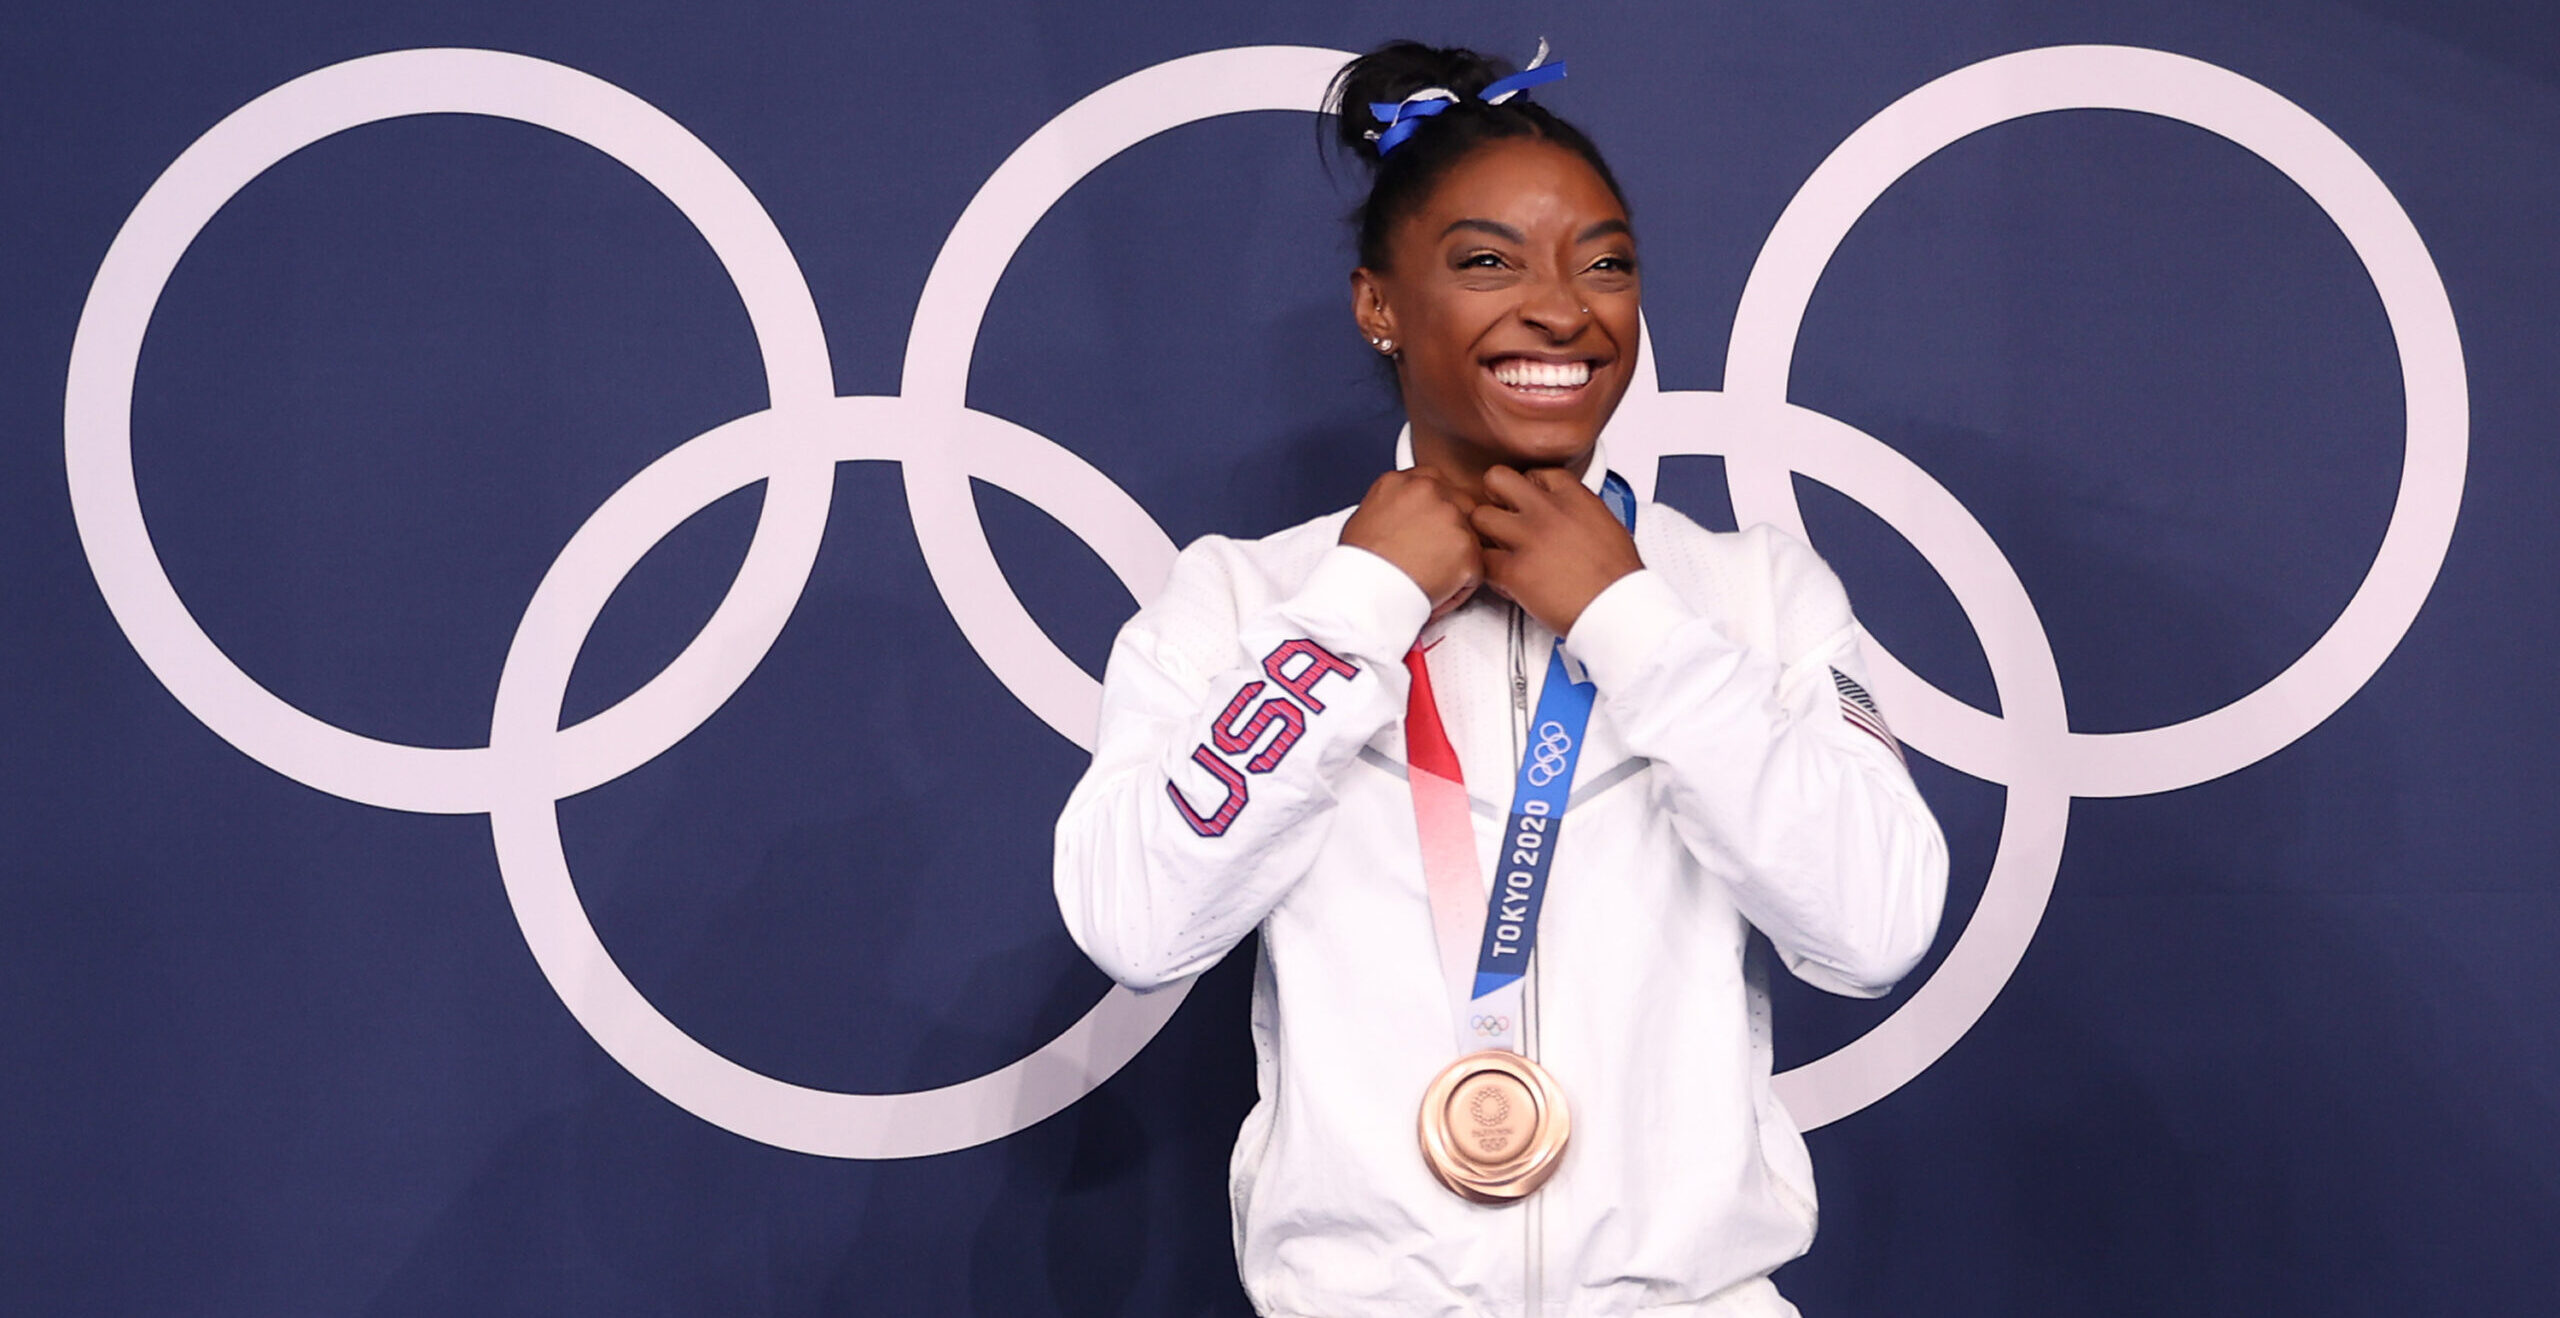 Simone Biles Claps Back At Haters: ‘I Can’t Hear You Over My 7 Olympic Medals’